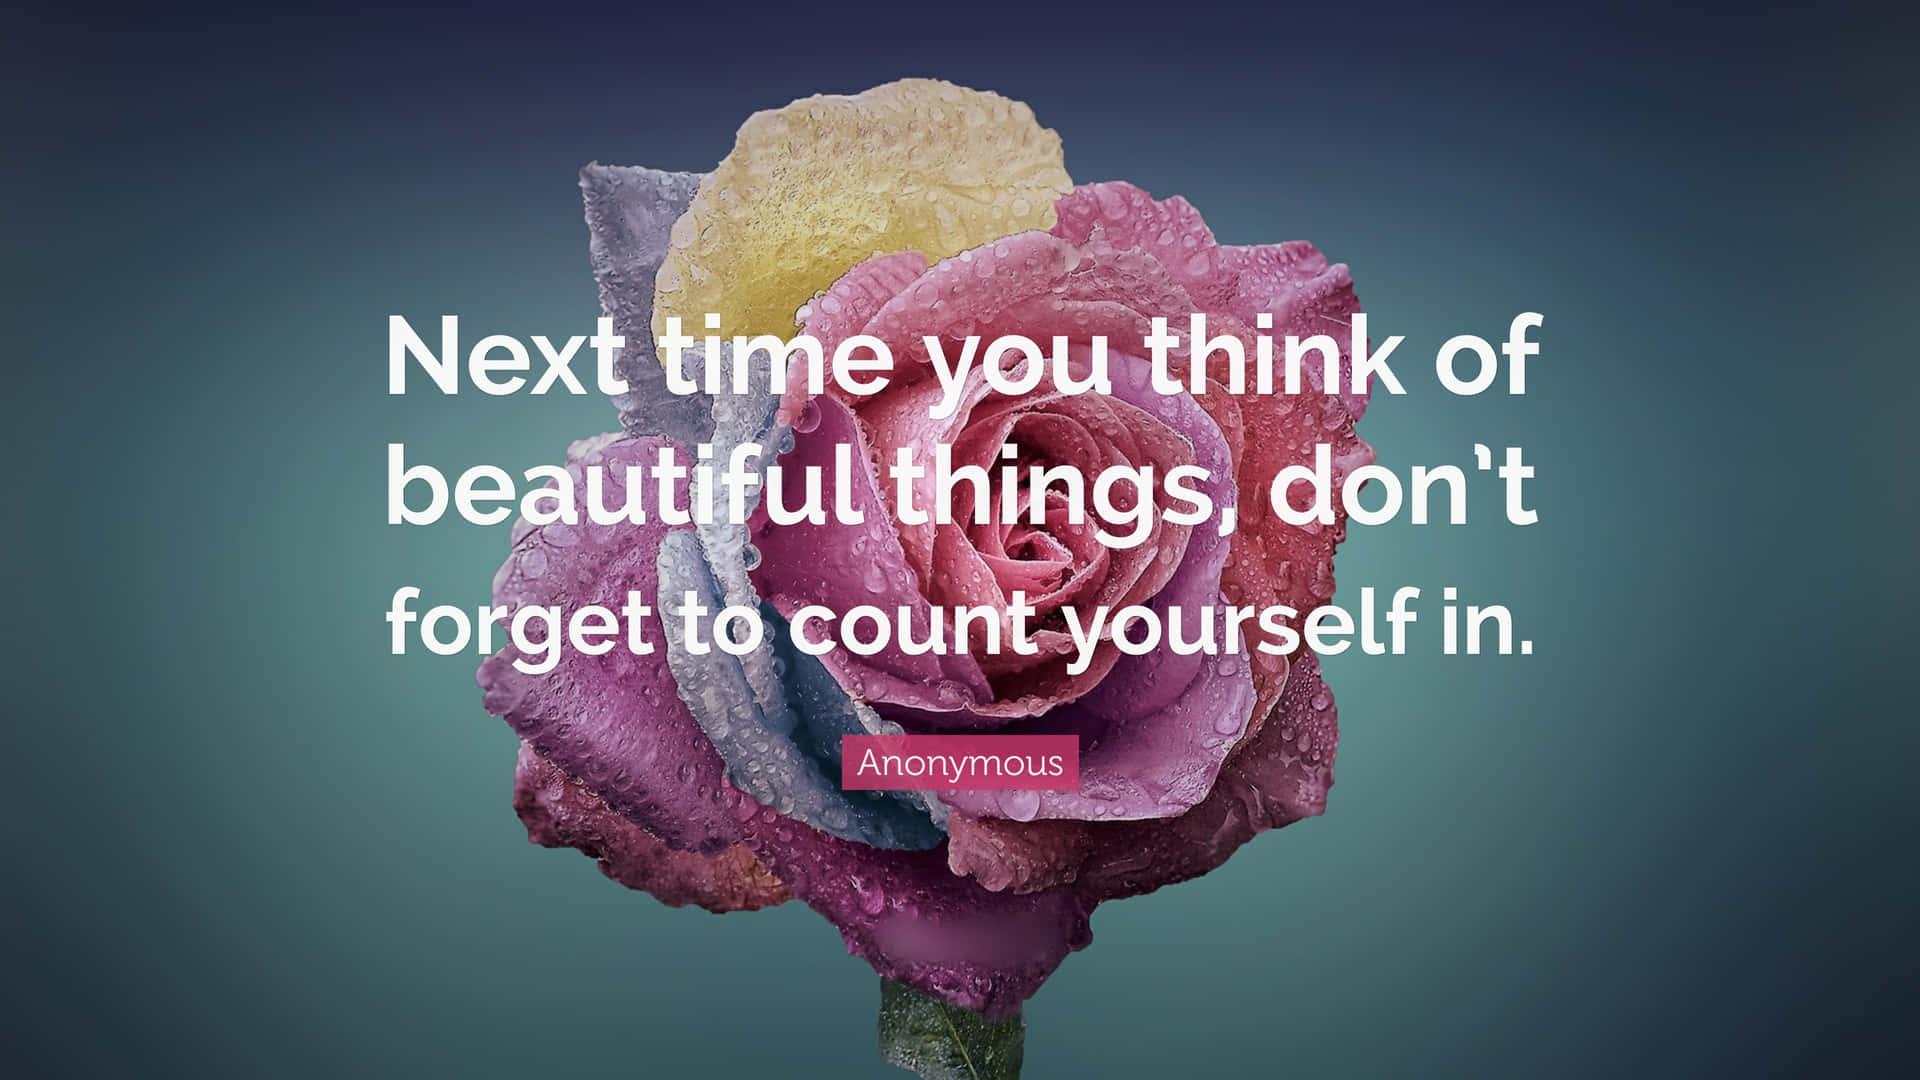 Next Time You Think Of Beautiful Things Don't Forget To Count Yourself In